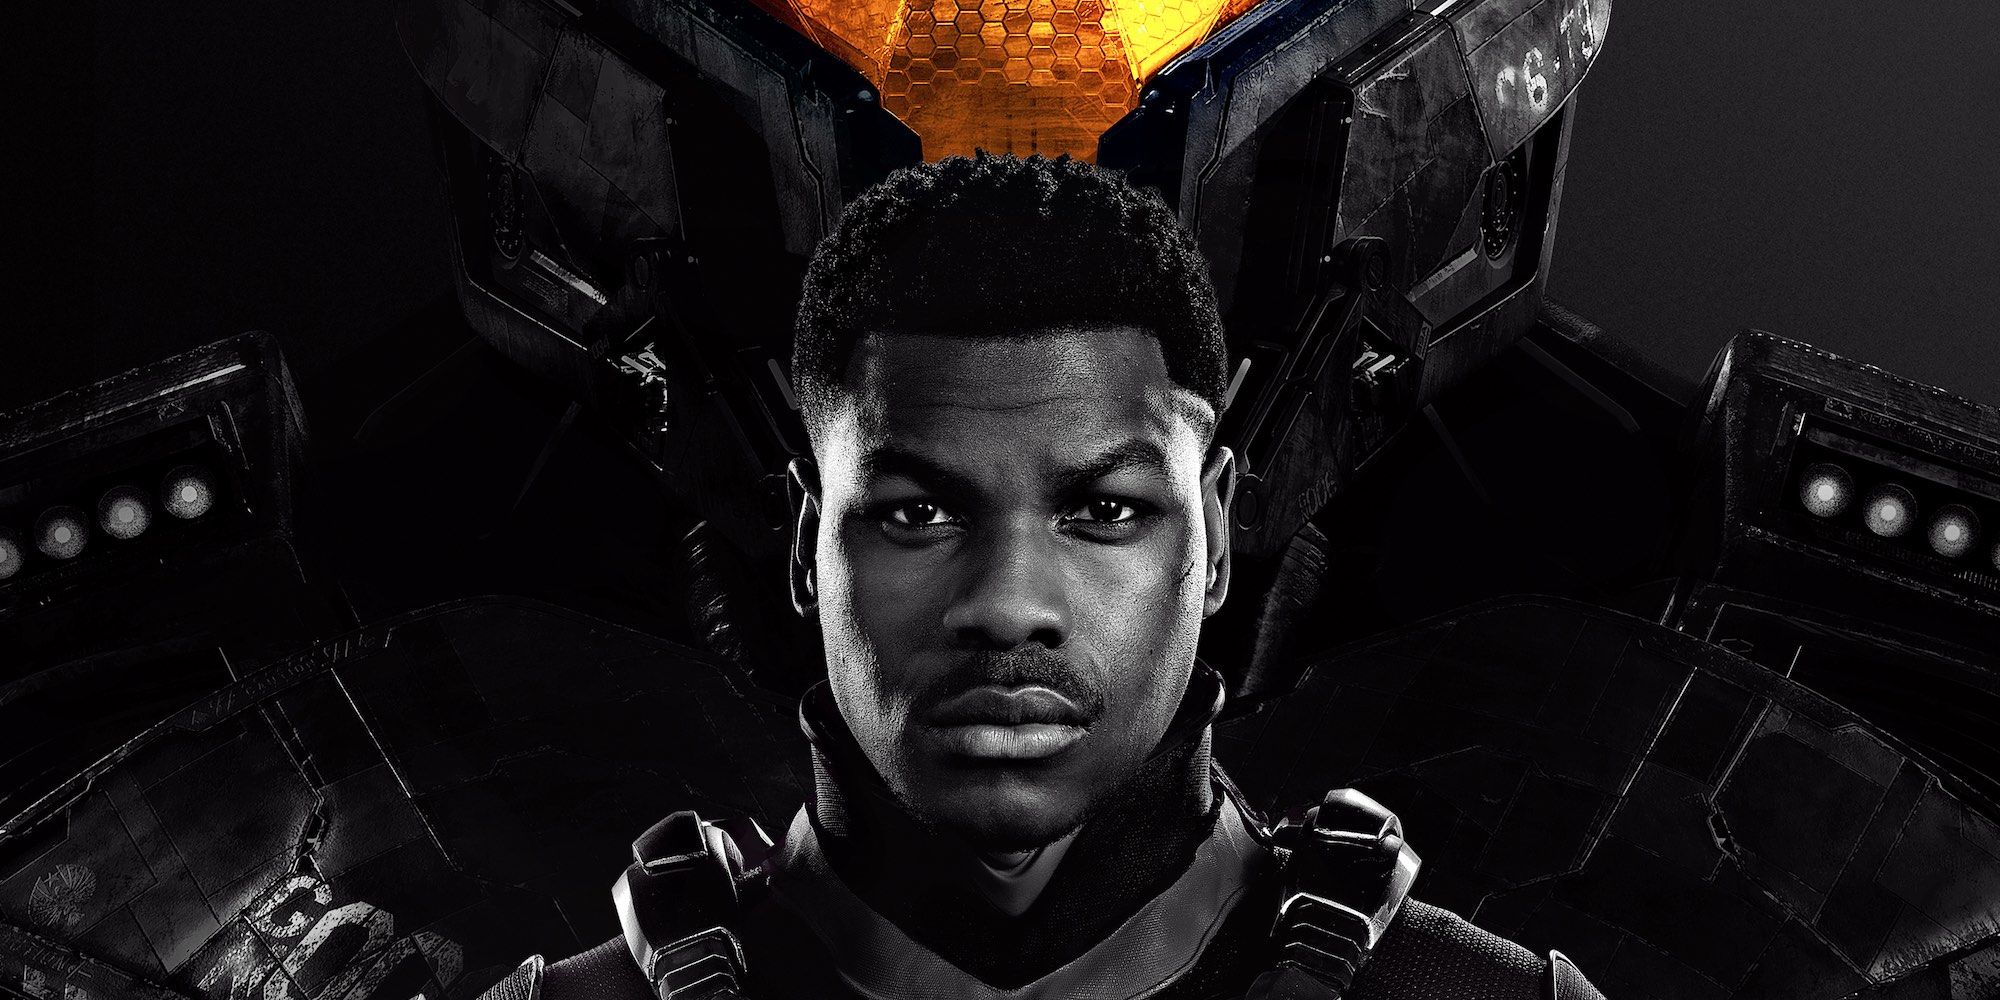 Does Pacific Rim Uprising Have A Post-Credits Scene?